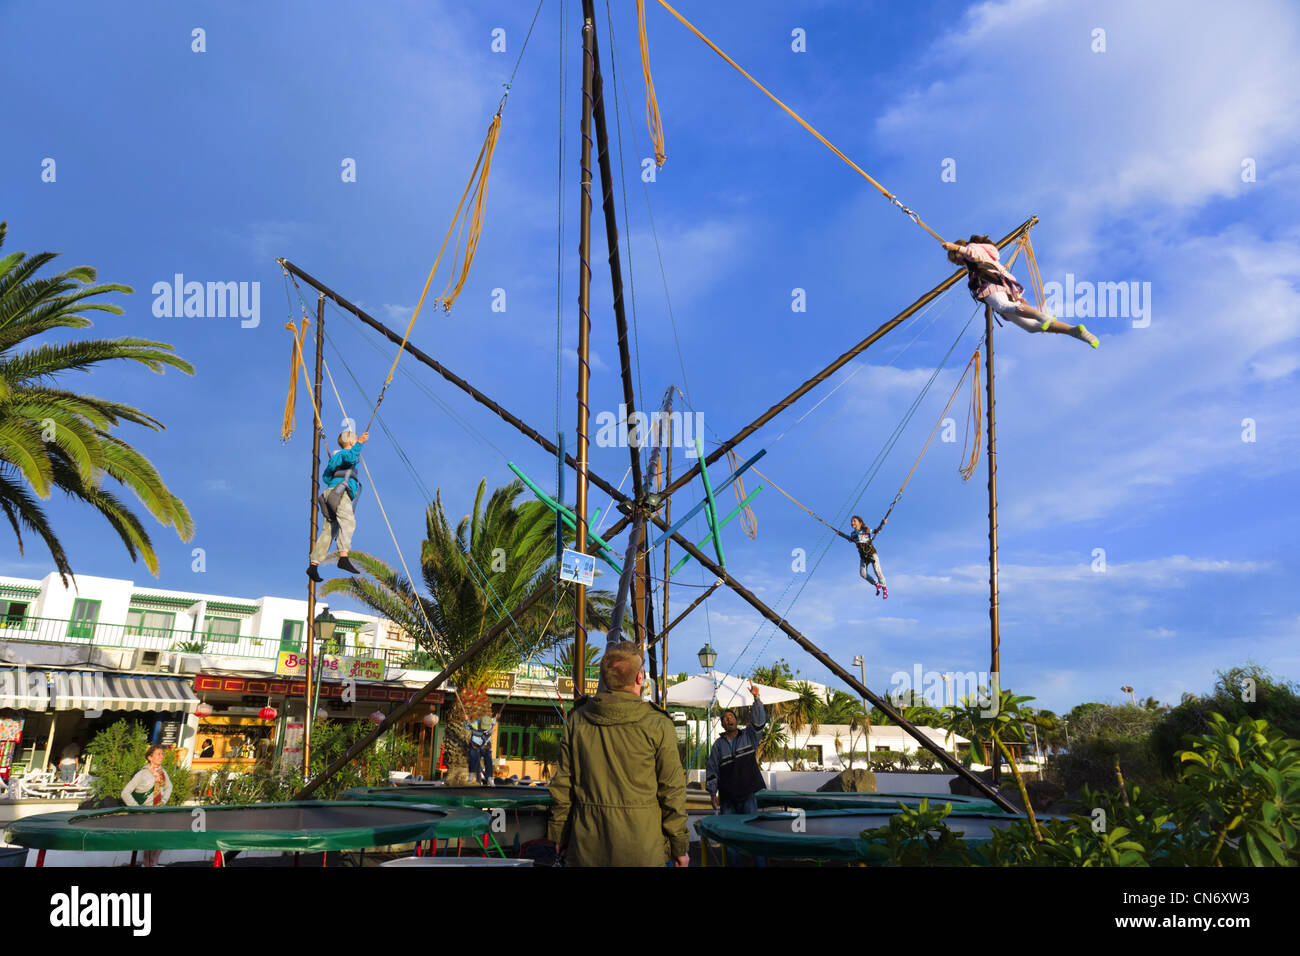 Lanzarote, Canary Islands - bungee bouncer for kids, Costa Teguise main square. Stock Photo